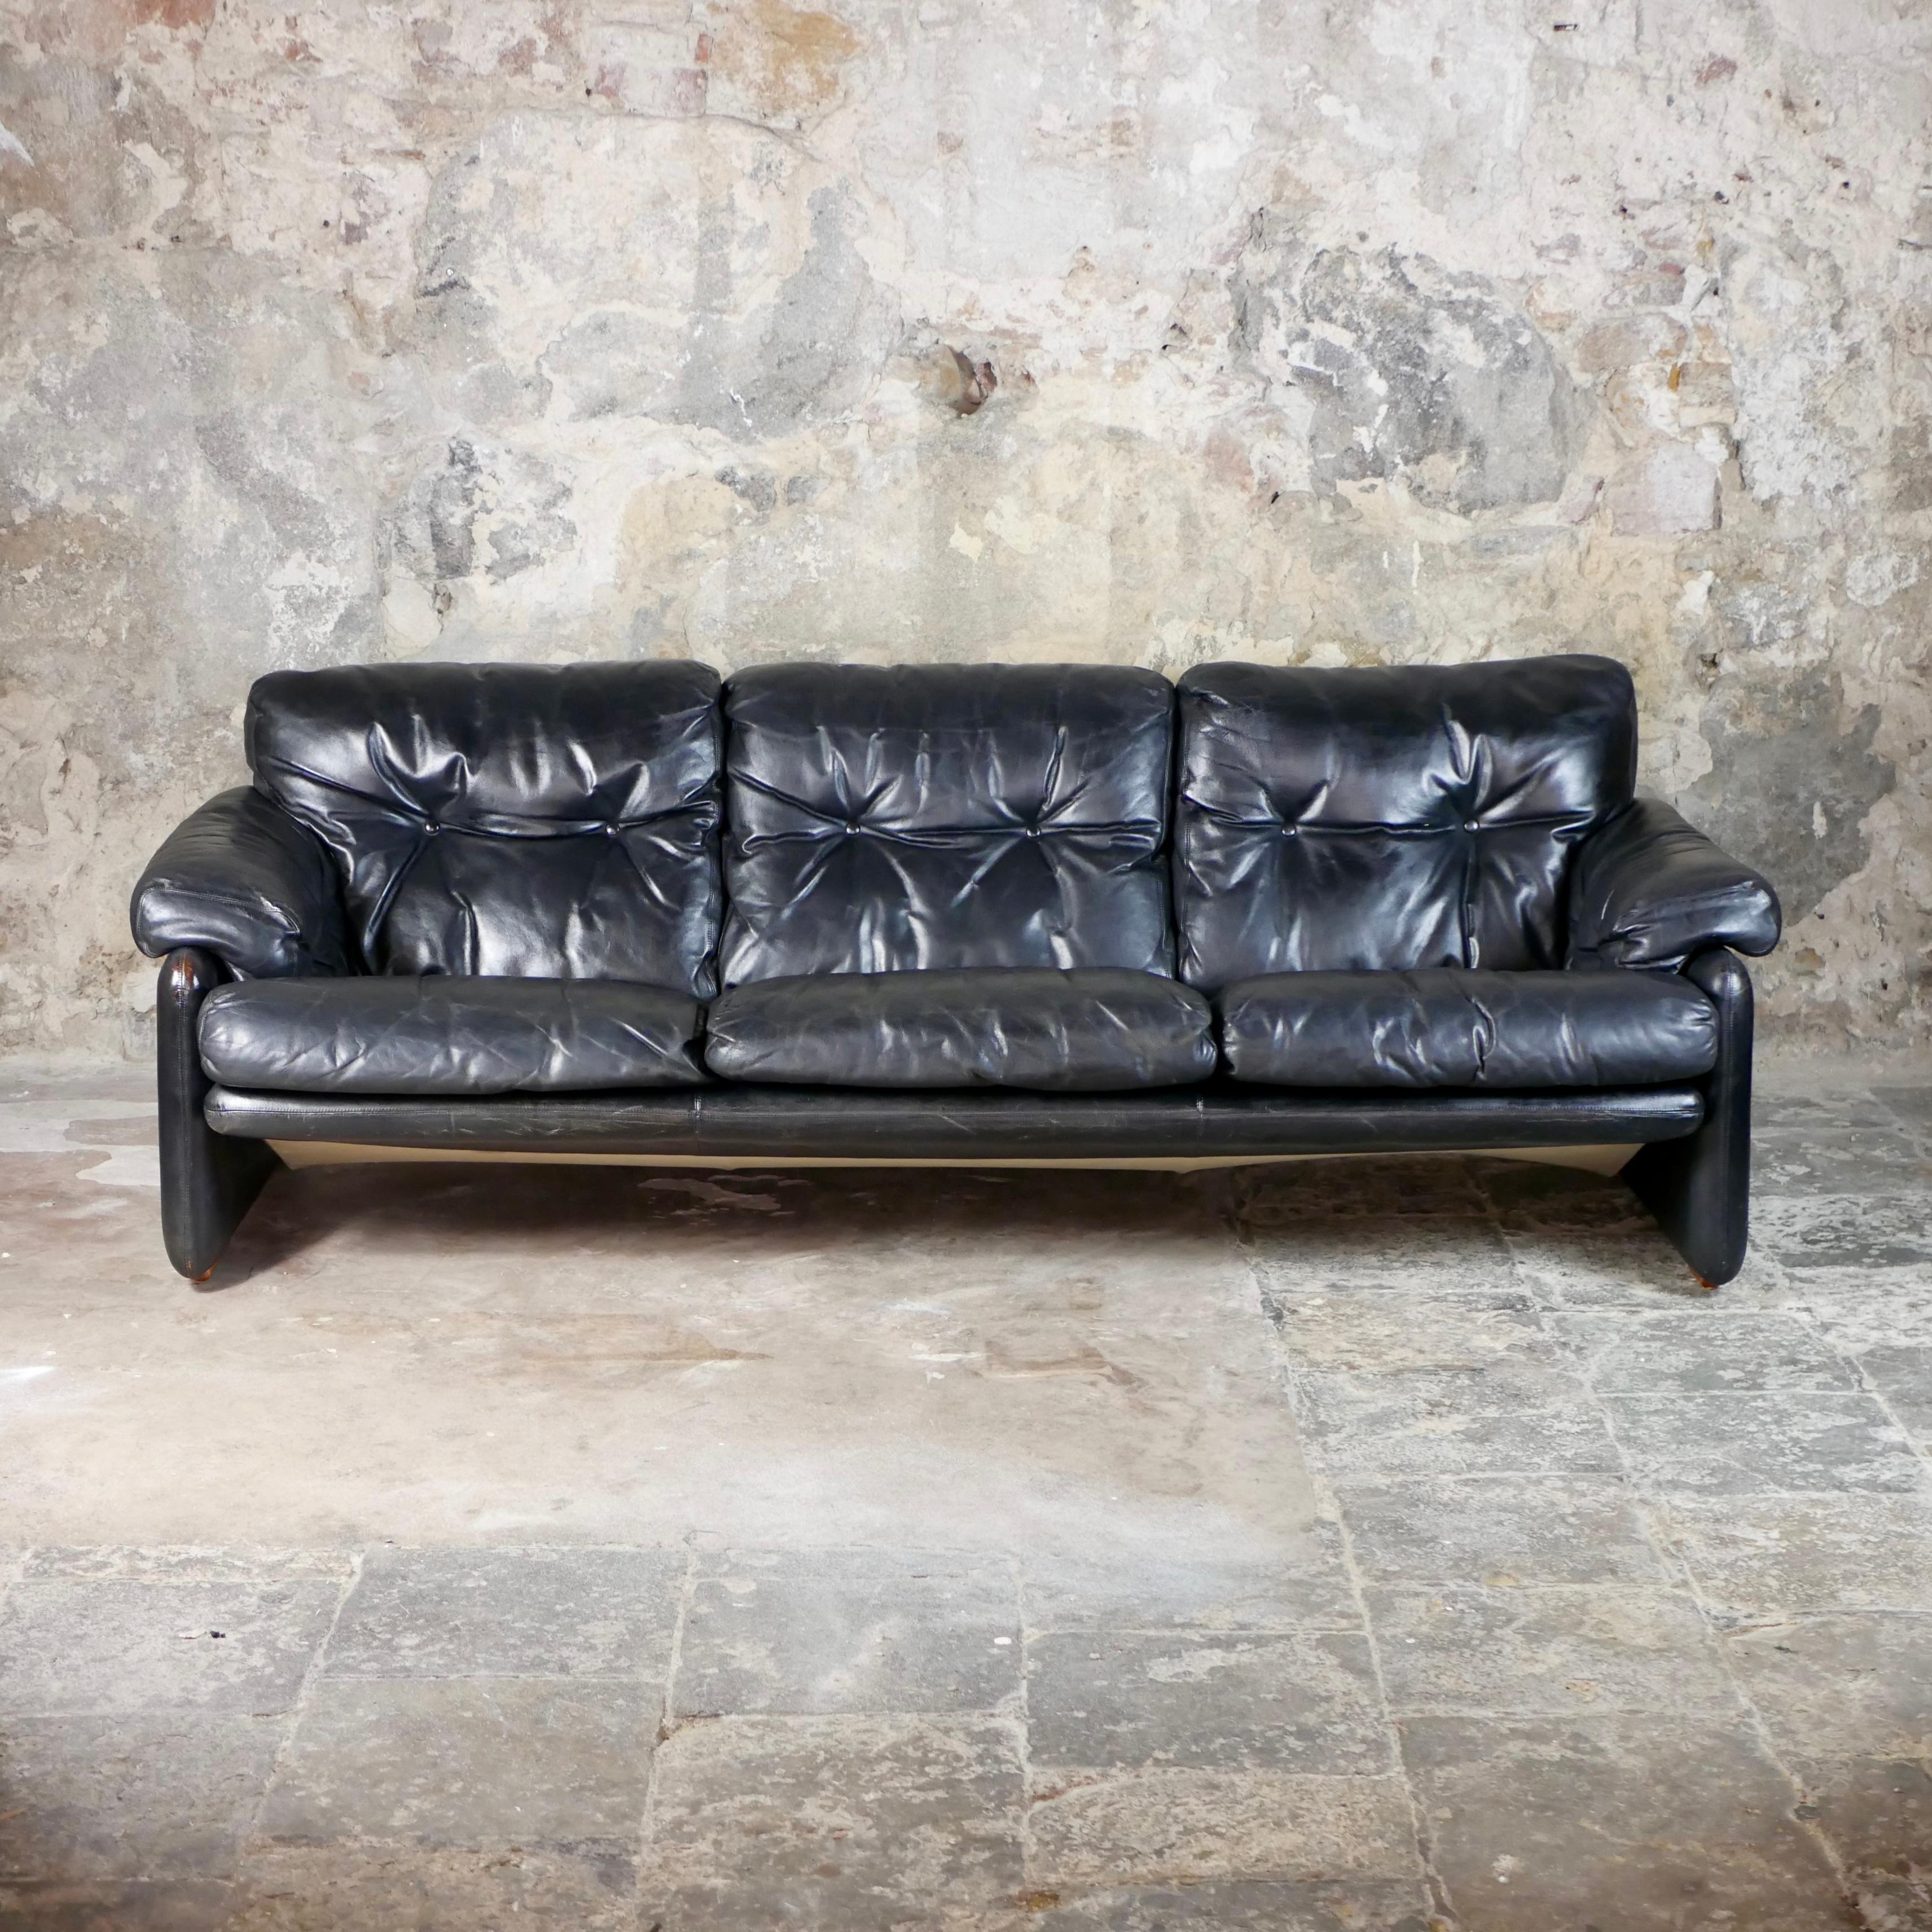 Stunning Coronado sofa in black leather, made in the 1960s by C&B Italia (later B&B Italia), designed by Afra & Tobia Scarpa.
First edition, original black leather covering. 3 seats.
Good condition, few traces of time.